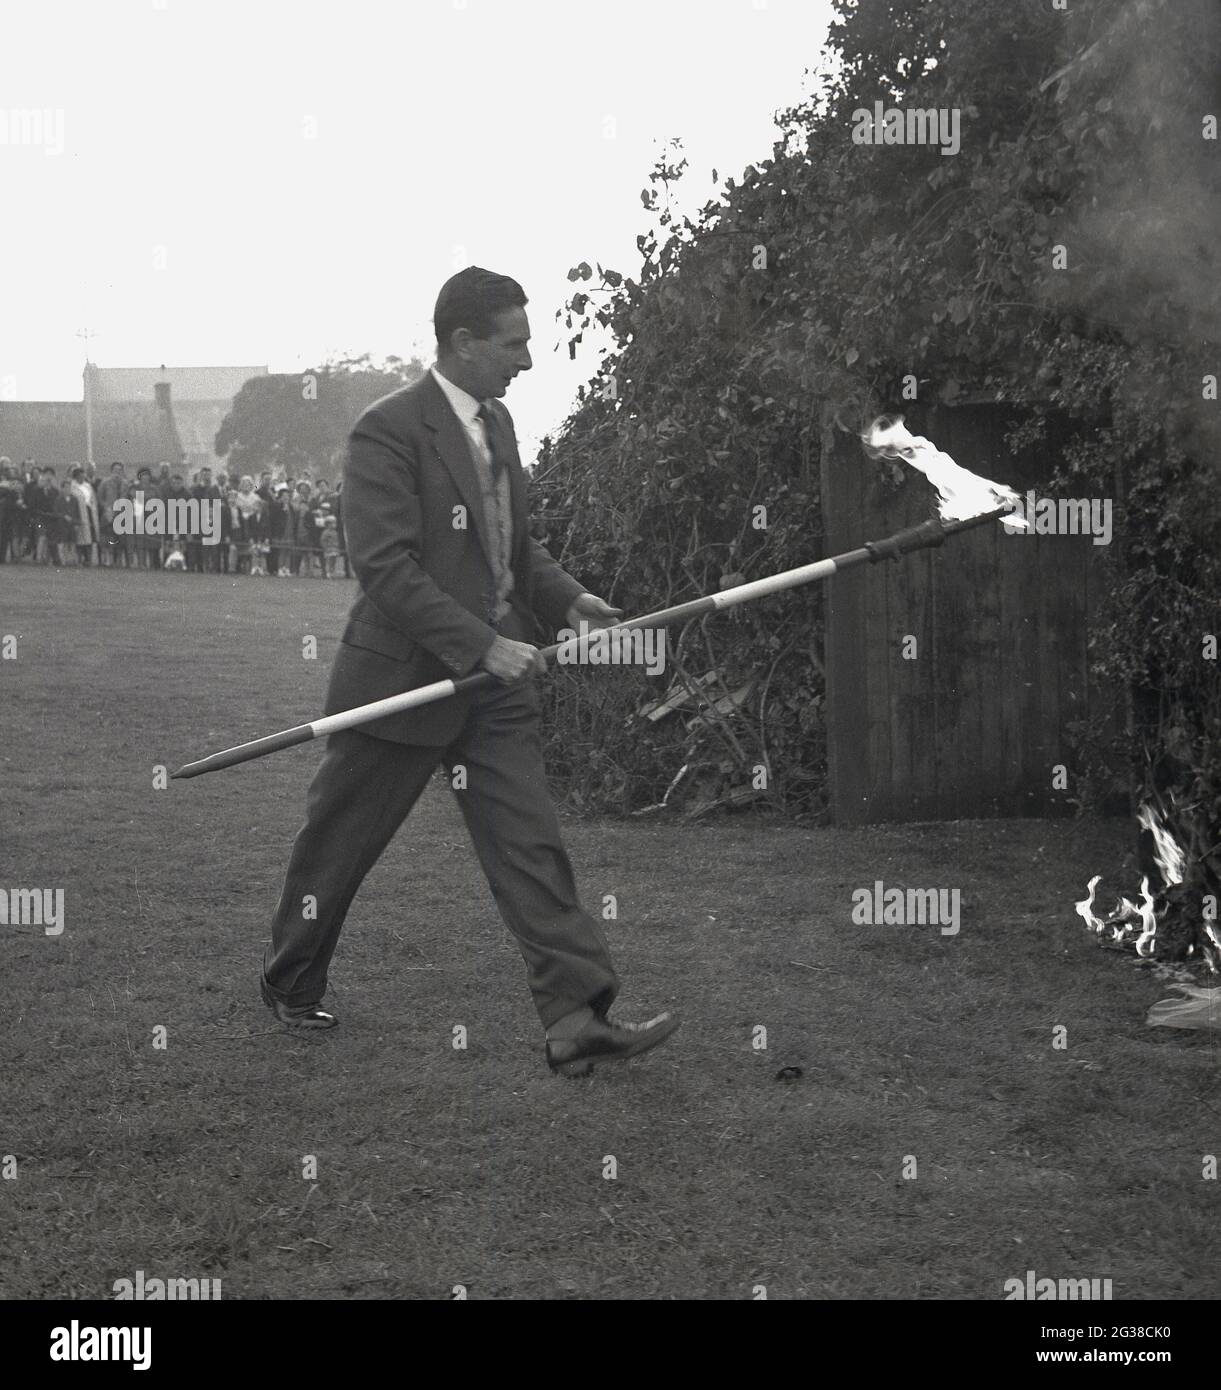 1960s, historical, evening time at a park and a man in a suit & tie holding a fire-lighter, a long pole lighted at one end with a flame, around the entrance to a large public bonfire covered with tree brances to set the the structure alight, Fife, Scotland, UK. Stock Photo